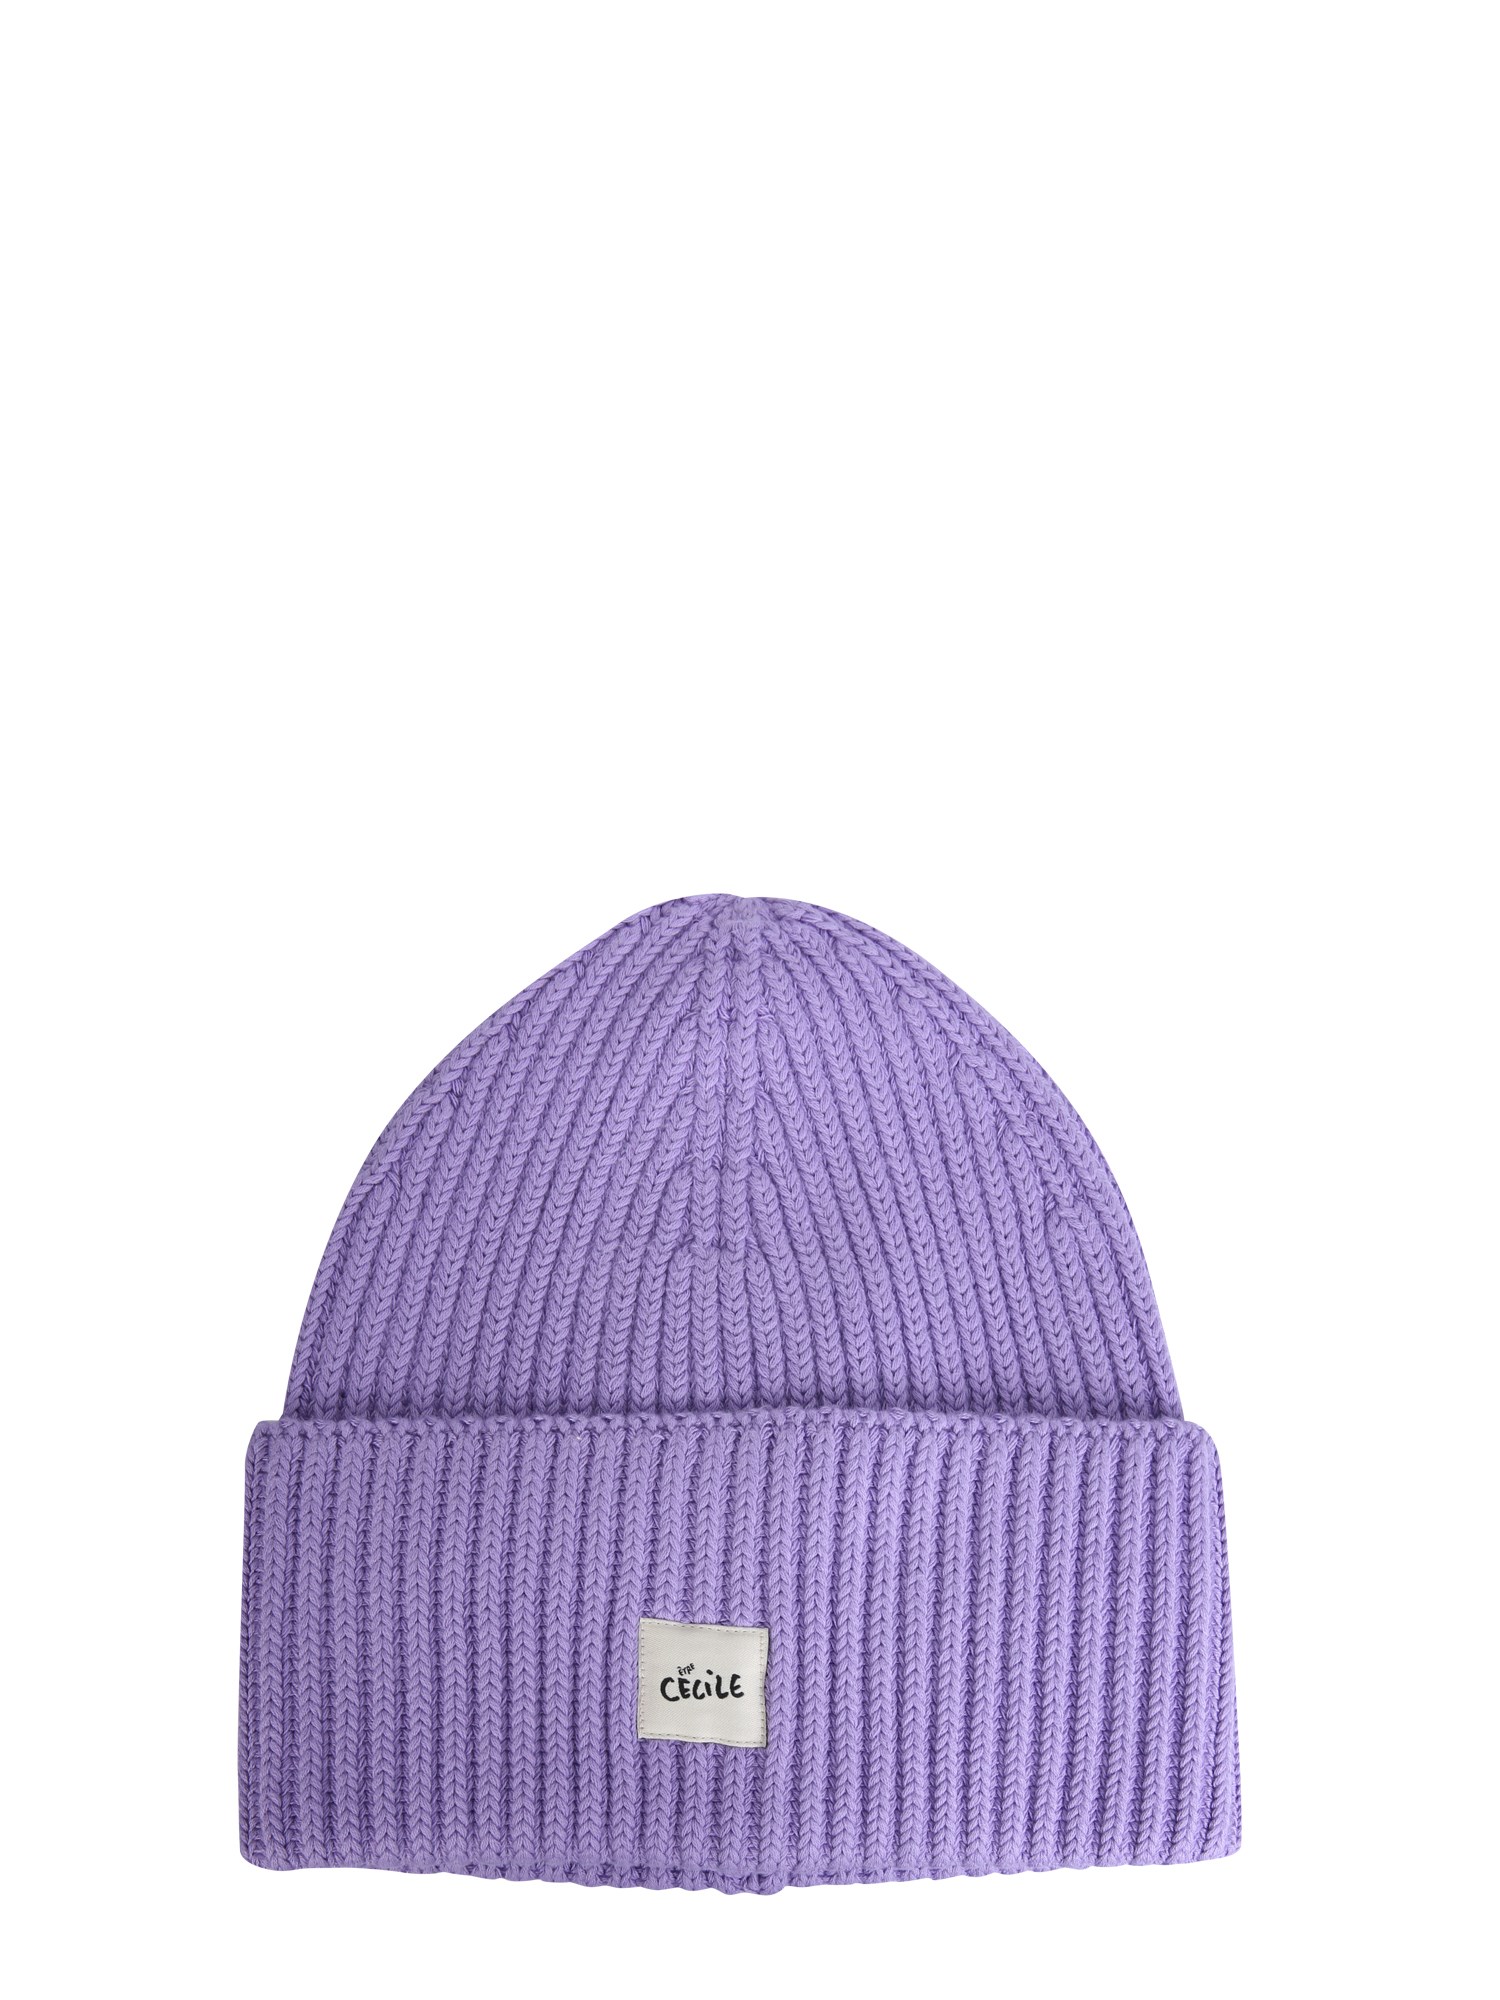 Etre Cecile KNITTED HAT